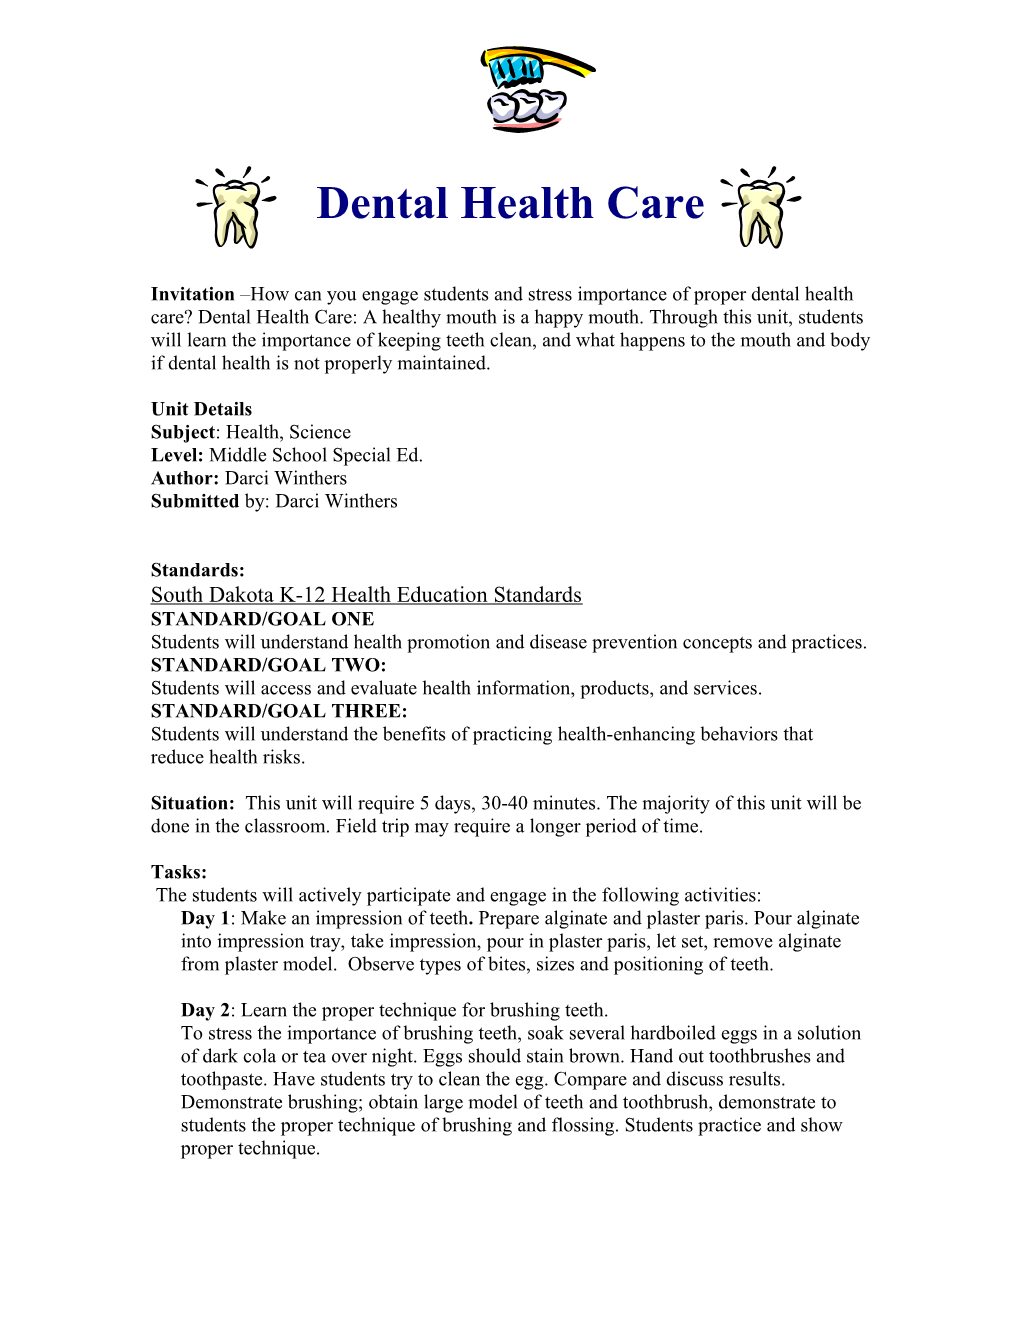 Invitation Dental Health Care: How Can You Engage Students and Stress Importance of Proper